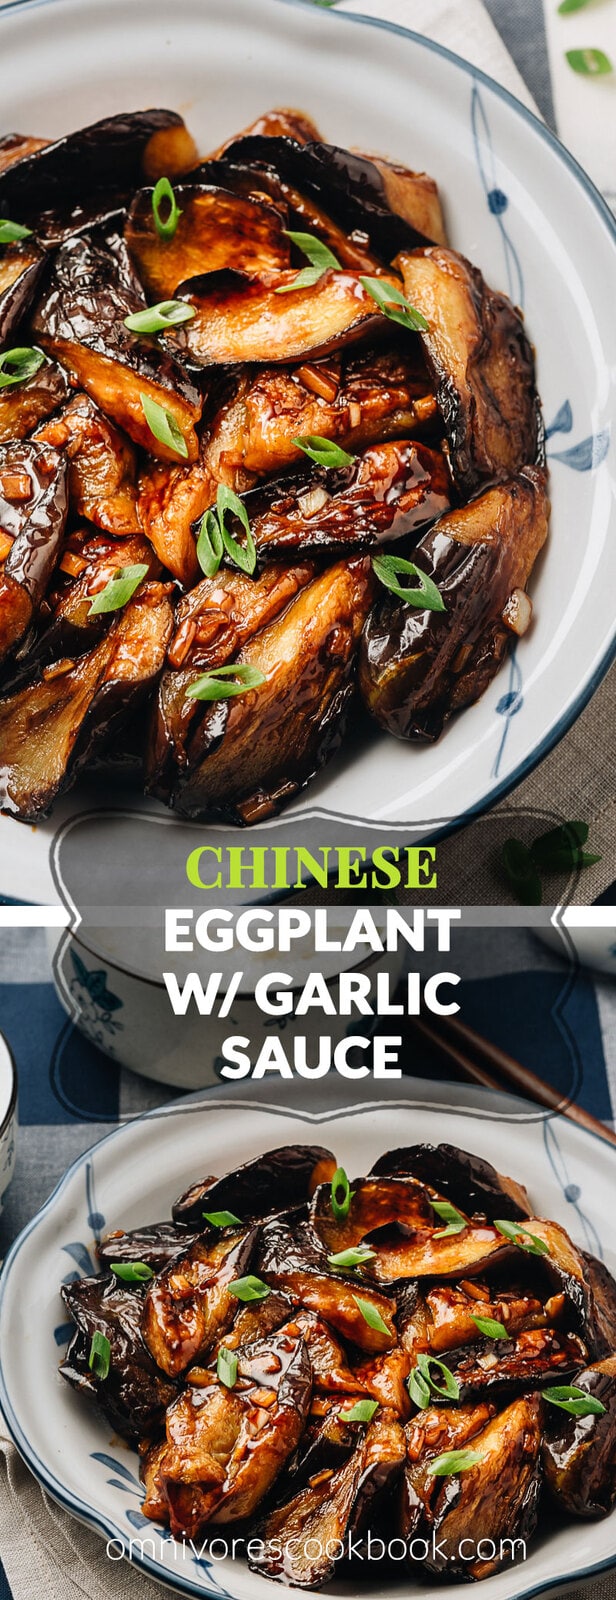 Chinese Eggplant with Garlic Sauce (红烧茄子) - The eggplant is grilled until crispy and smoky, and then cooked in a rich savory garlic sauce. This vegan dish is very satisfying, both as a side or a main dish served over rice or noodles. {Gluten-Free Adaptable}